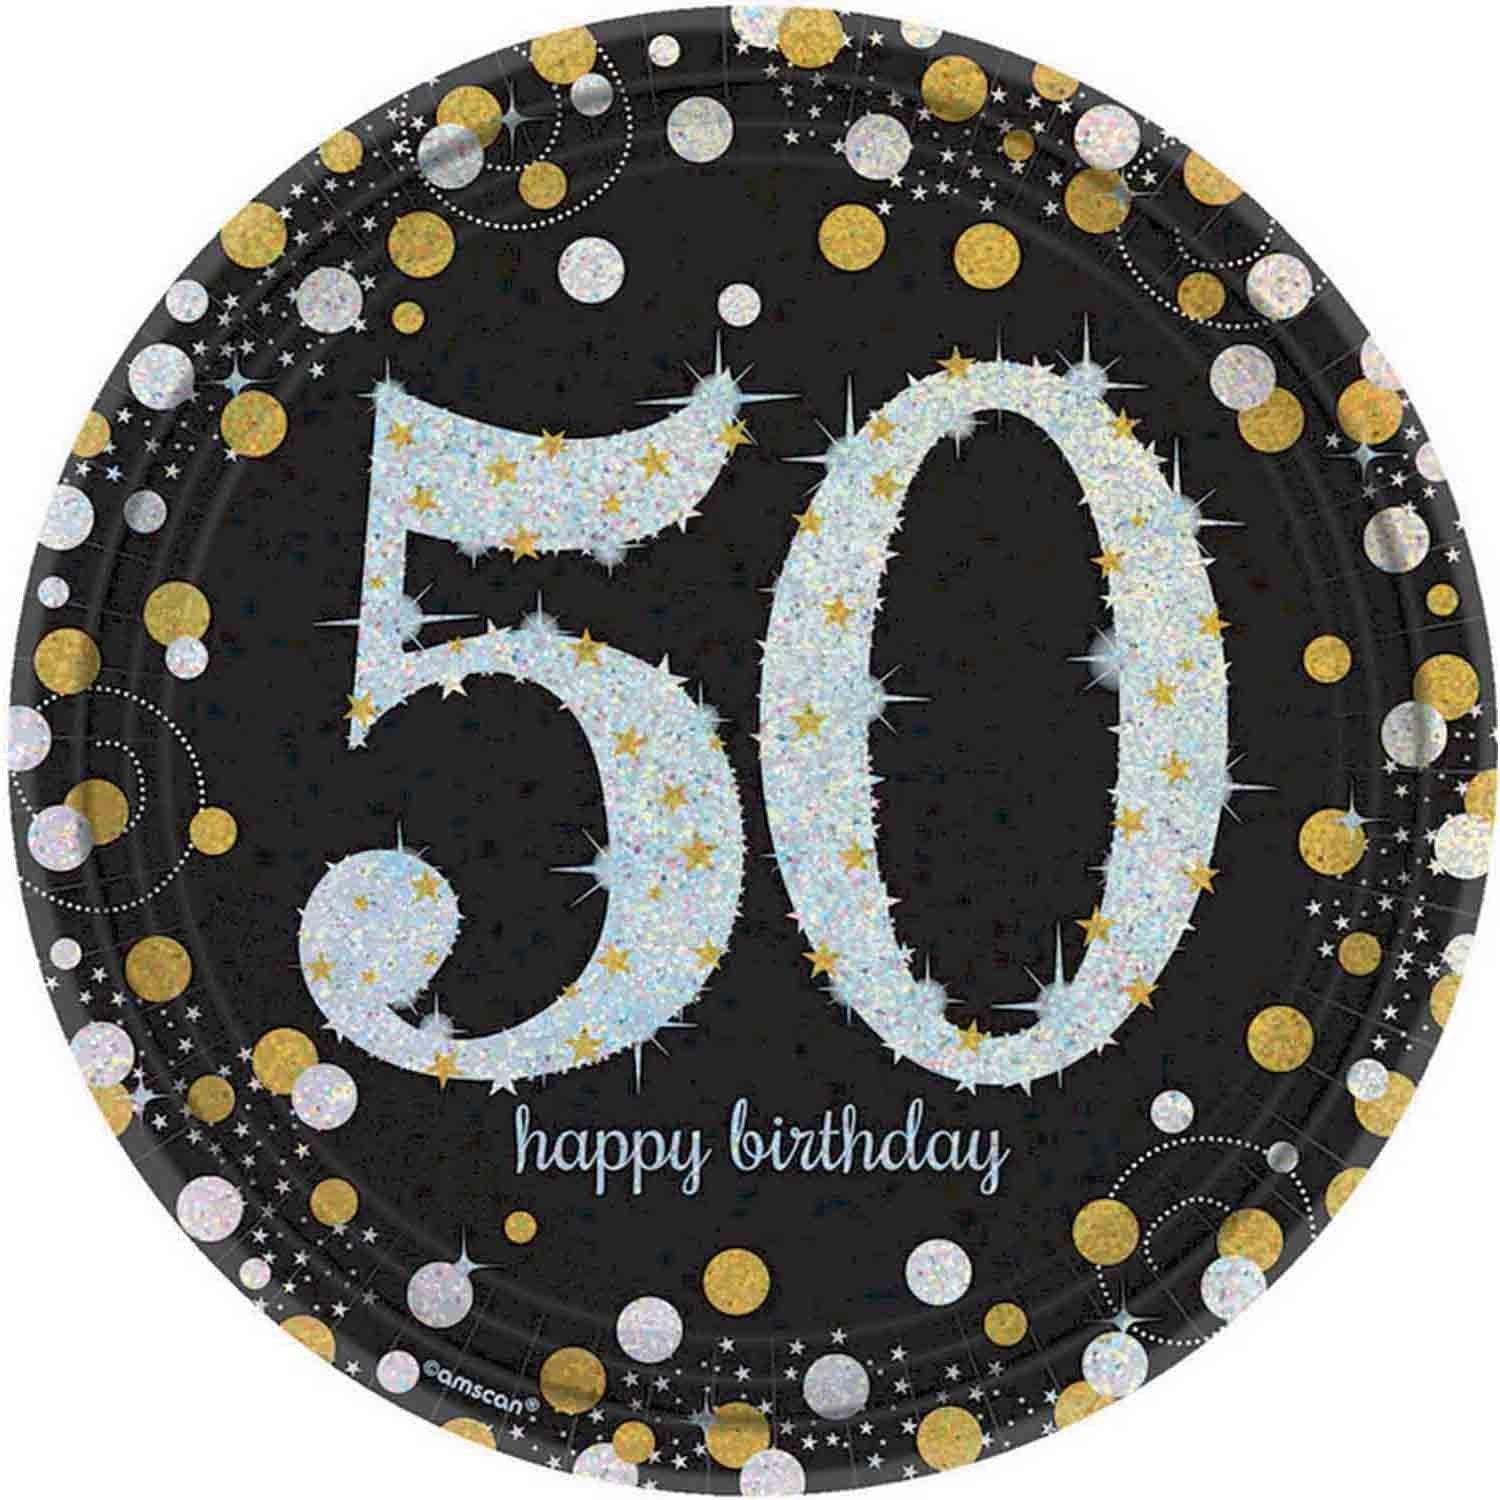 50th birthday party plates in black, gold and silver